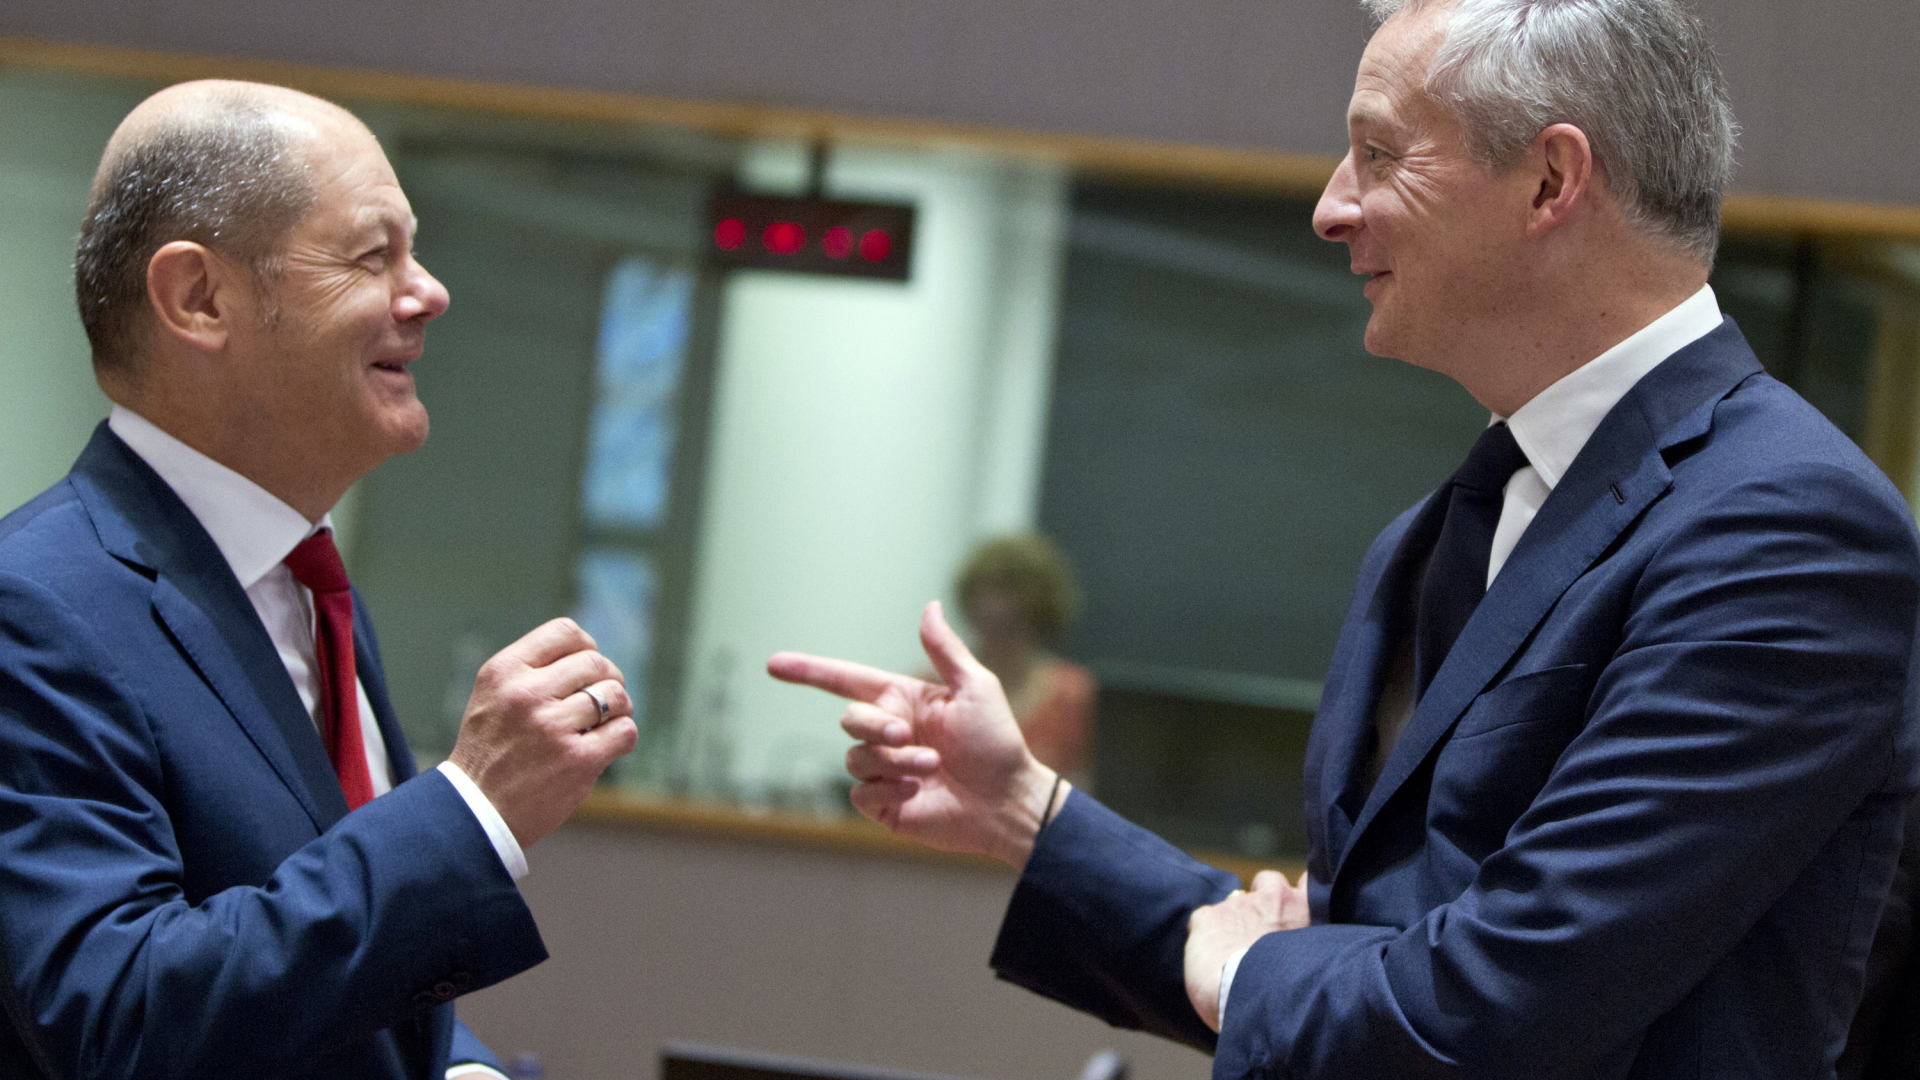 Olaf Scholz und Bruno Le Maire | dpa